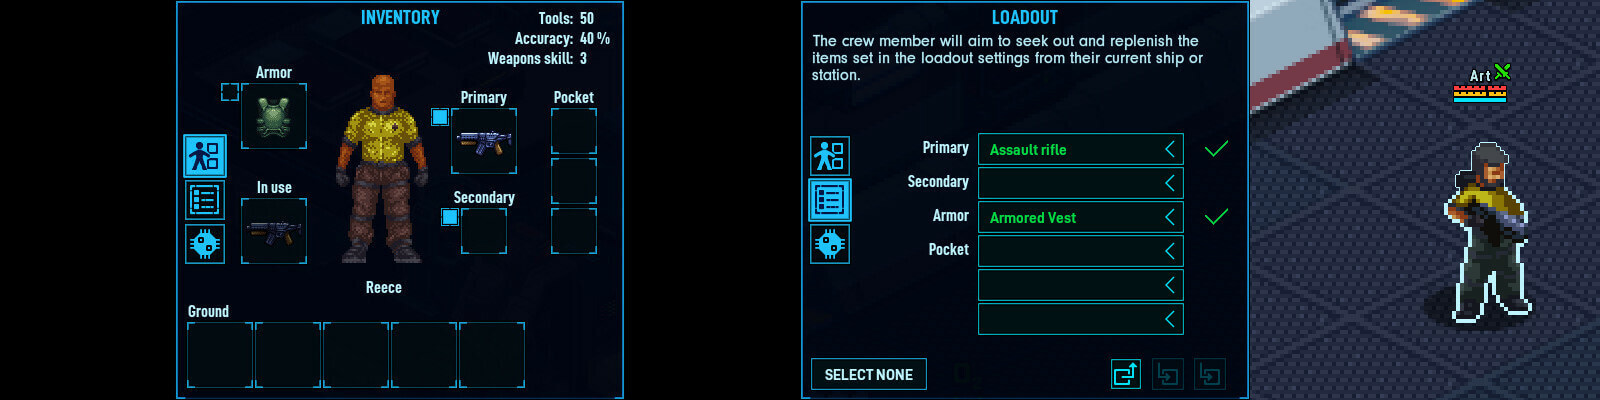 The new crew inventory and loadout system menus in Space Haven